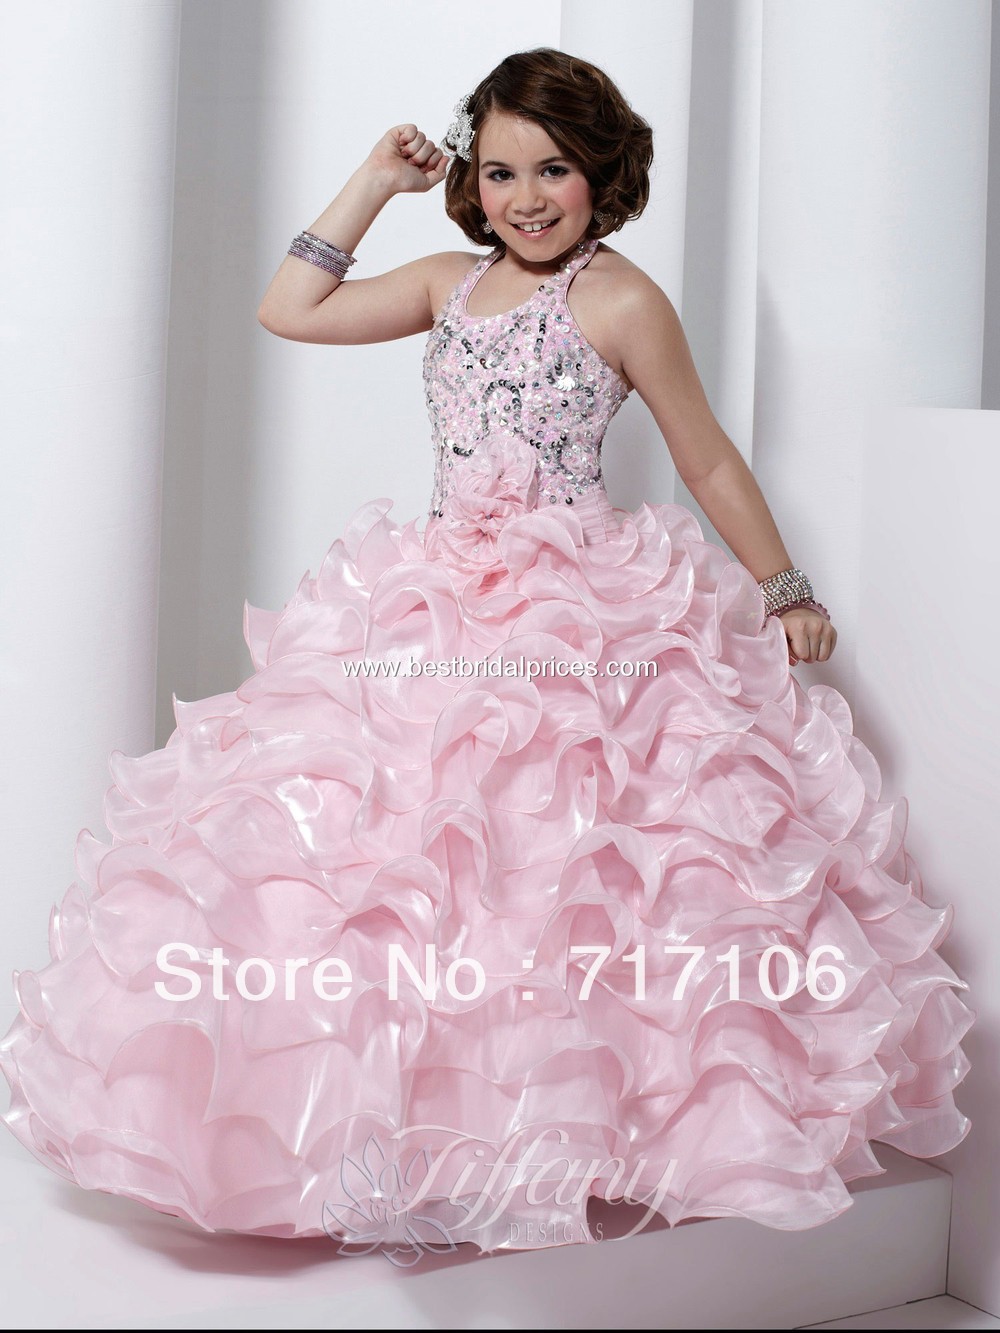 F14 Halter pink Free Shipping Fashion New Beaded Organza Lovely Pageant Girl's Party Princess Flower Girl Dresses Gowns